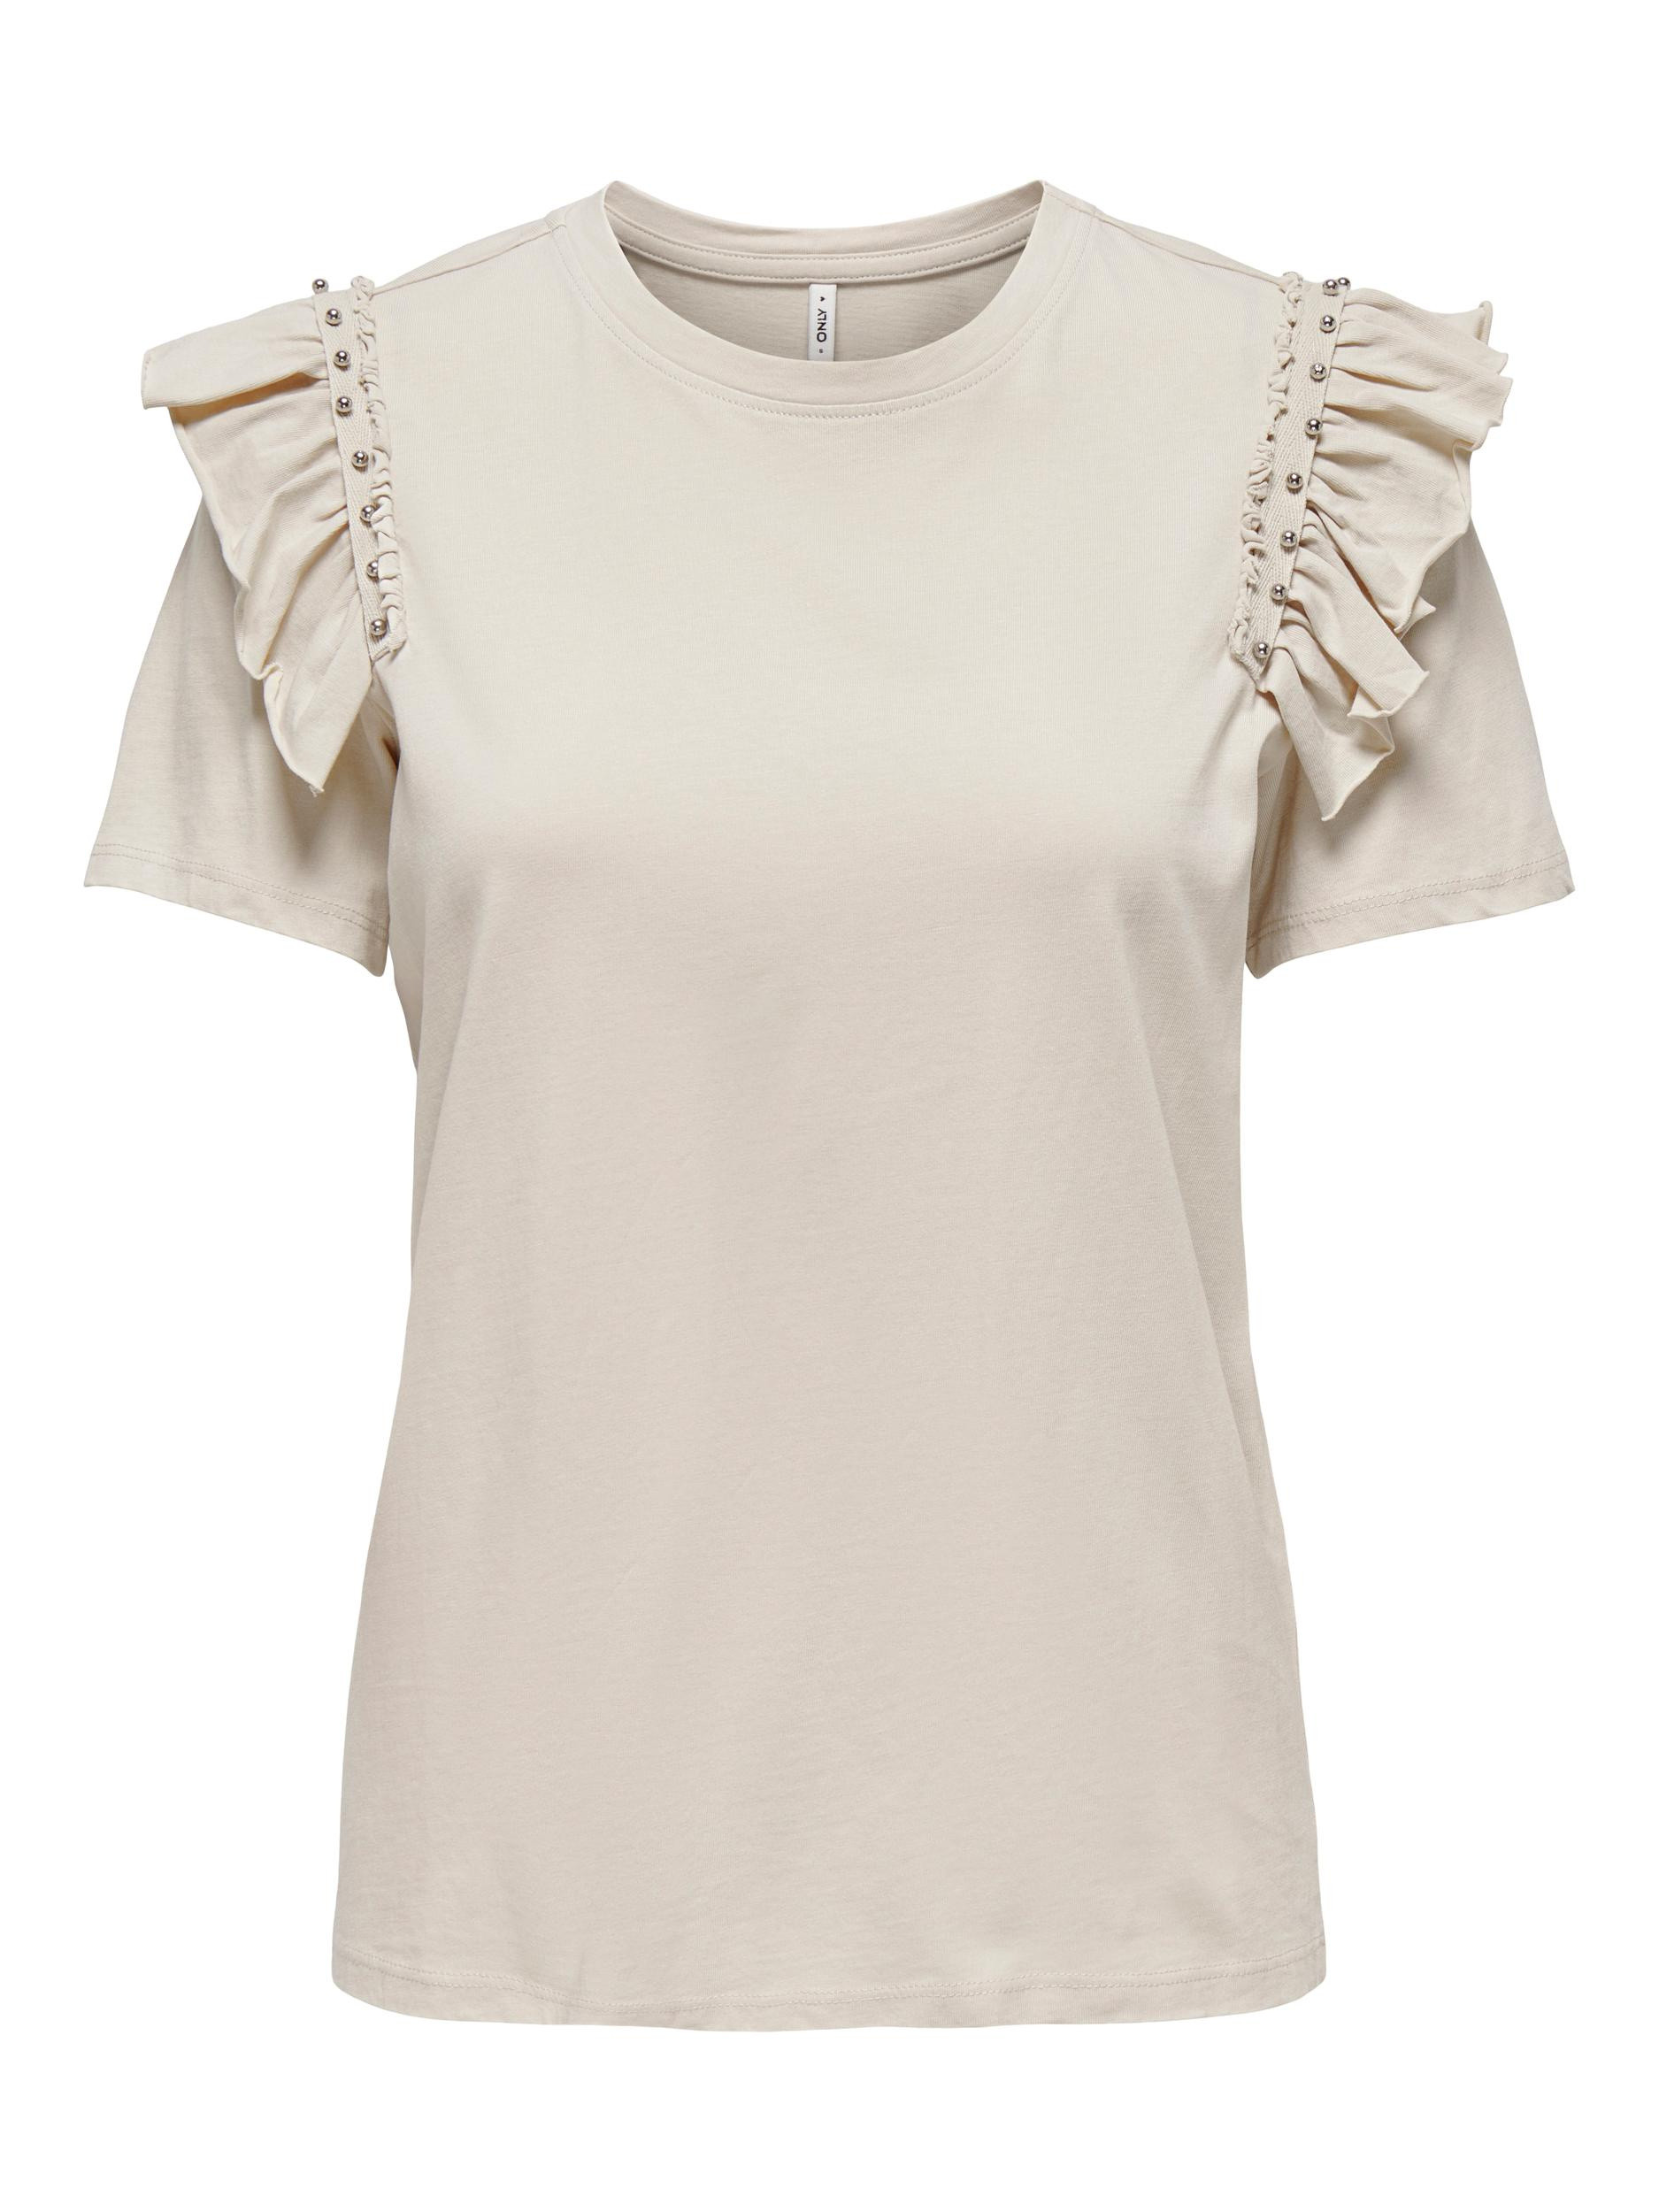 Only - Regular fit cotton T-shirt with ruffles, Beige, large image number 0